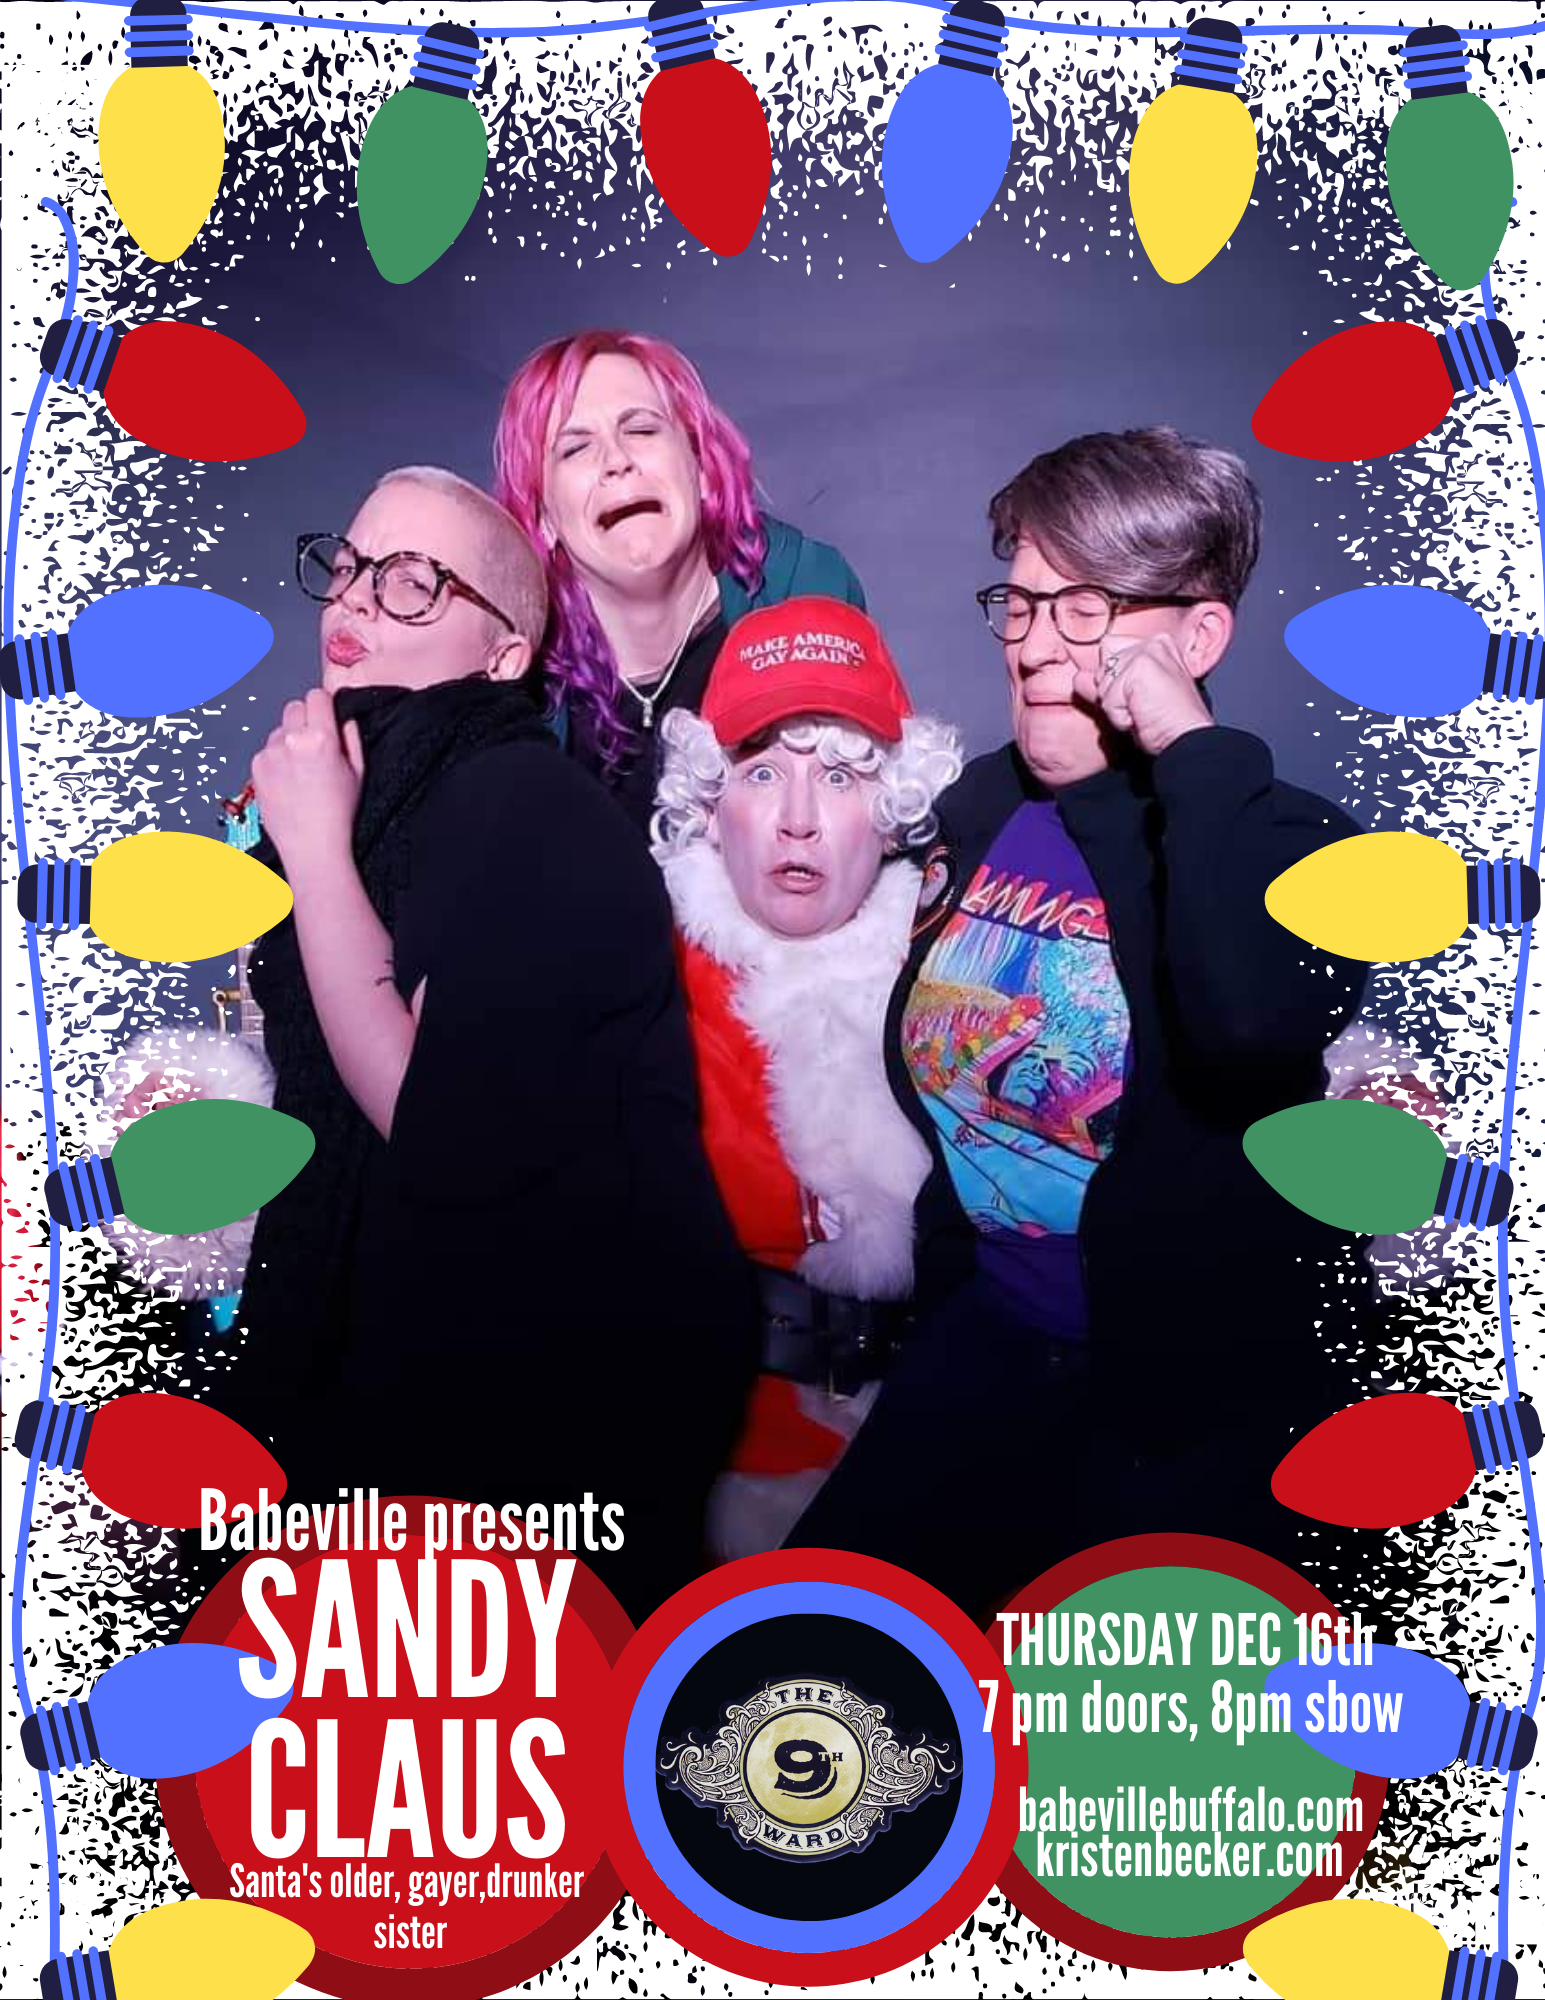 Sandy Claus: Out of the Claus-et -- A Comedy Show by Kristen Becker